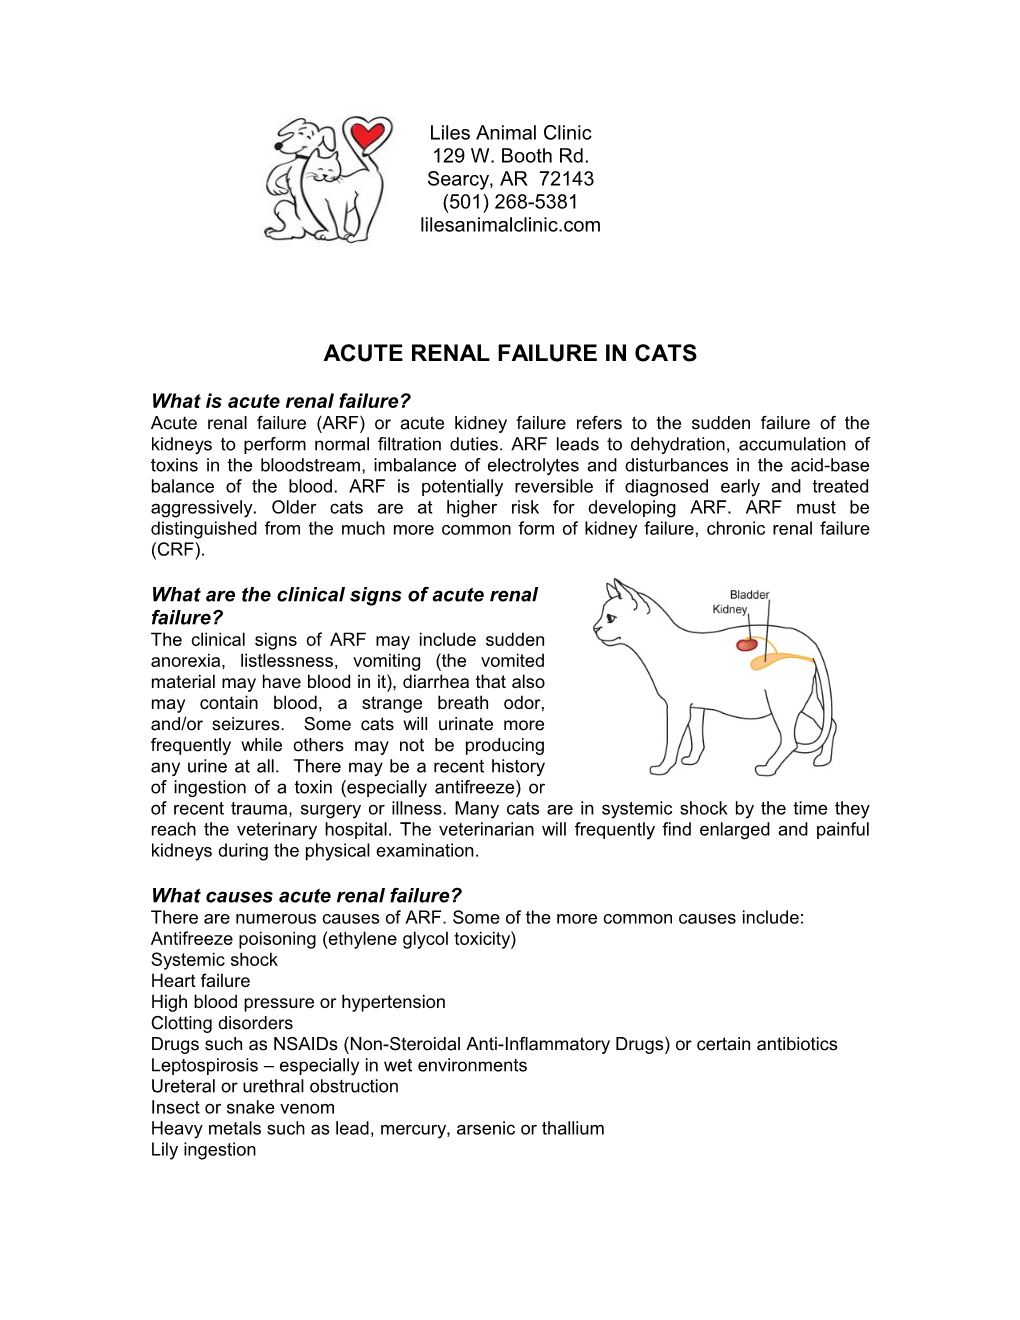 Acute Renal Failure in Cats